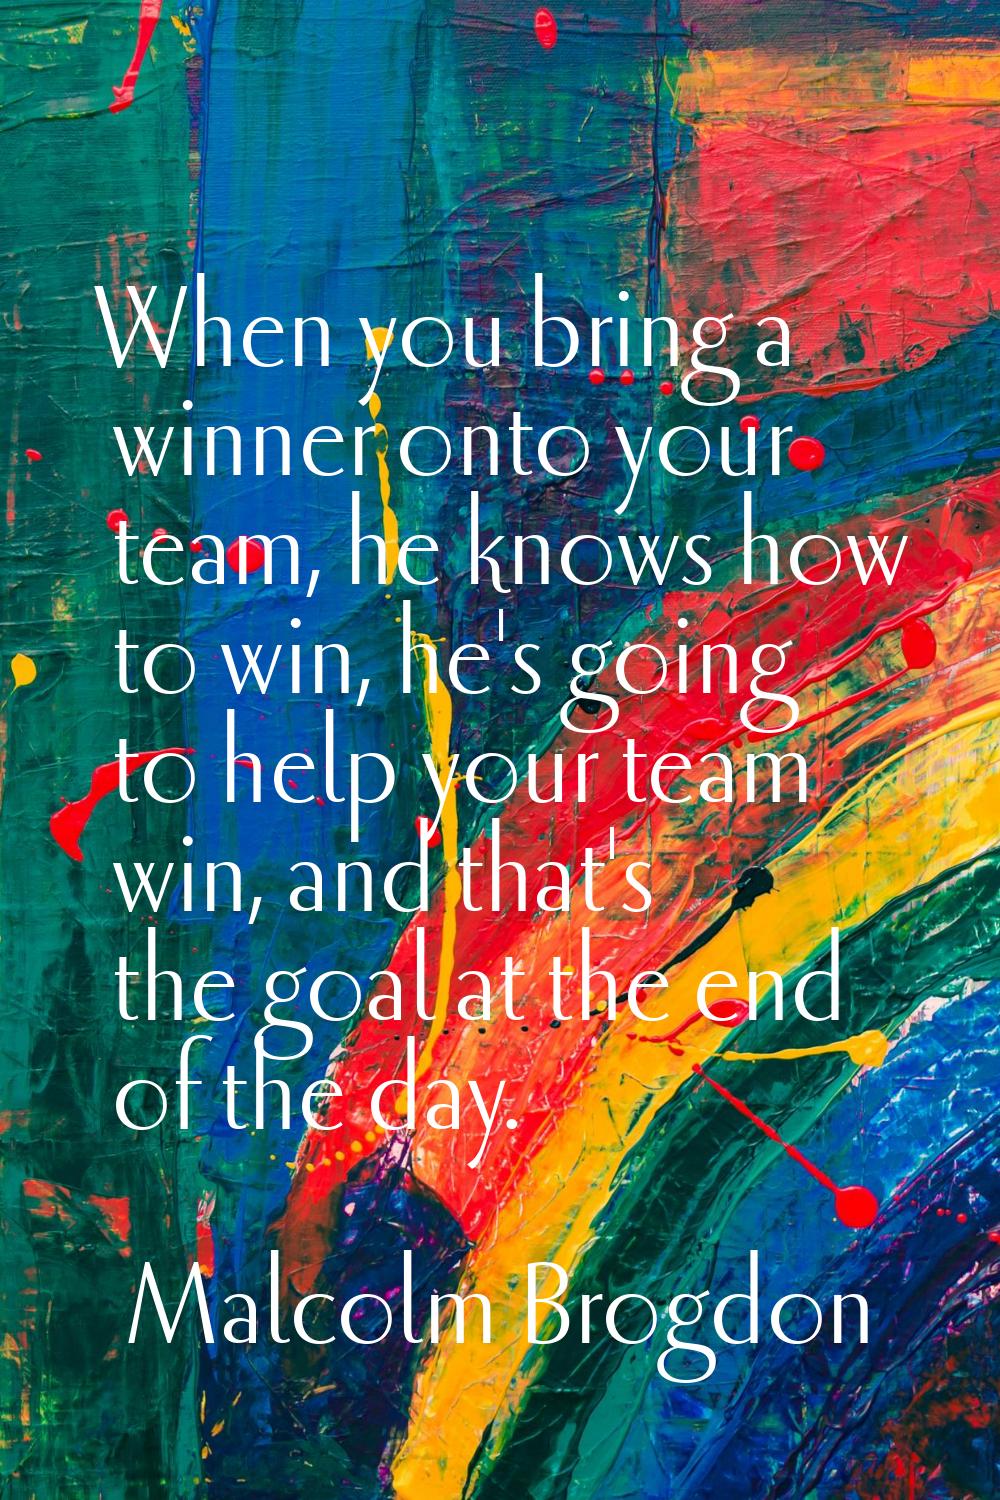 When you bring a winner onto your team, he knows how to win, he's going to help your team win, and 